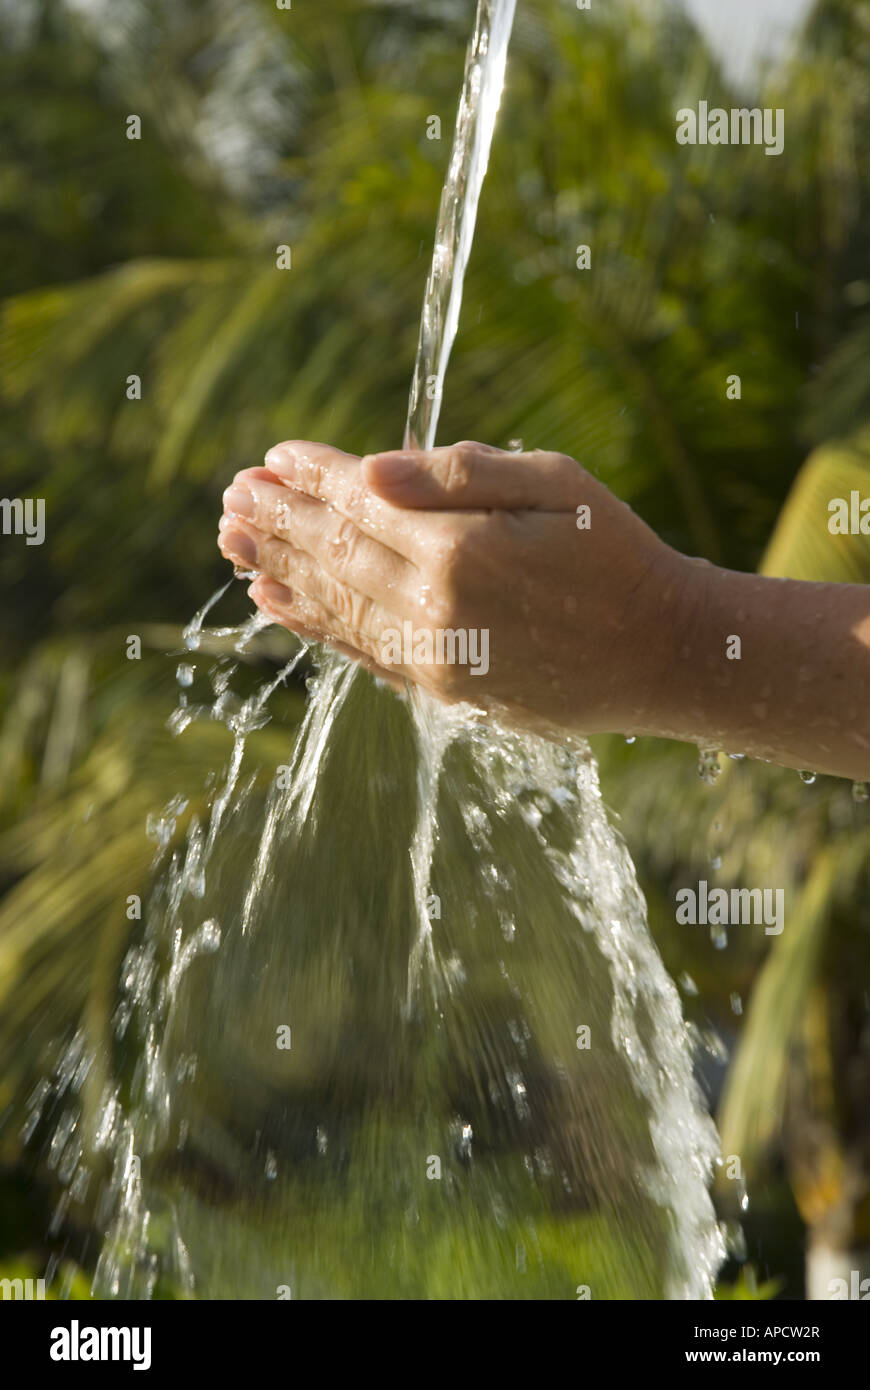 Hands cupped to catch water with palm tress in the background Stock Photo